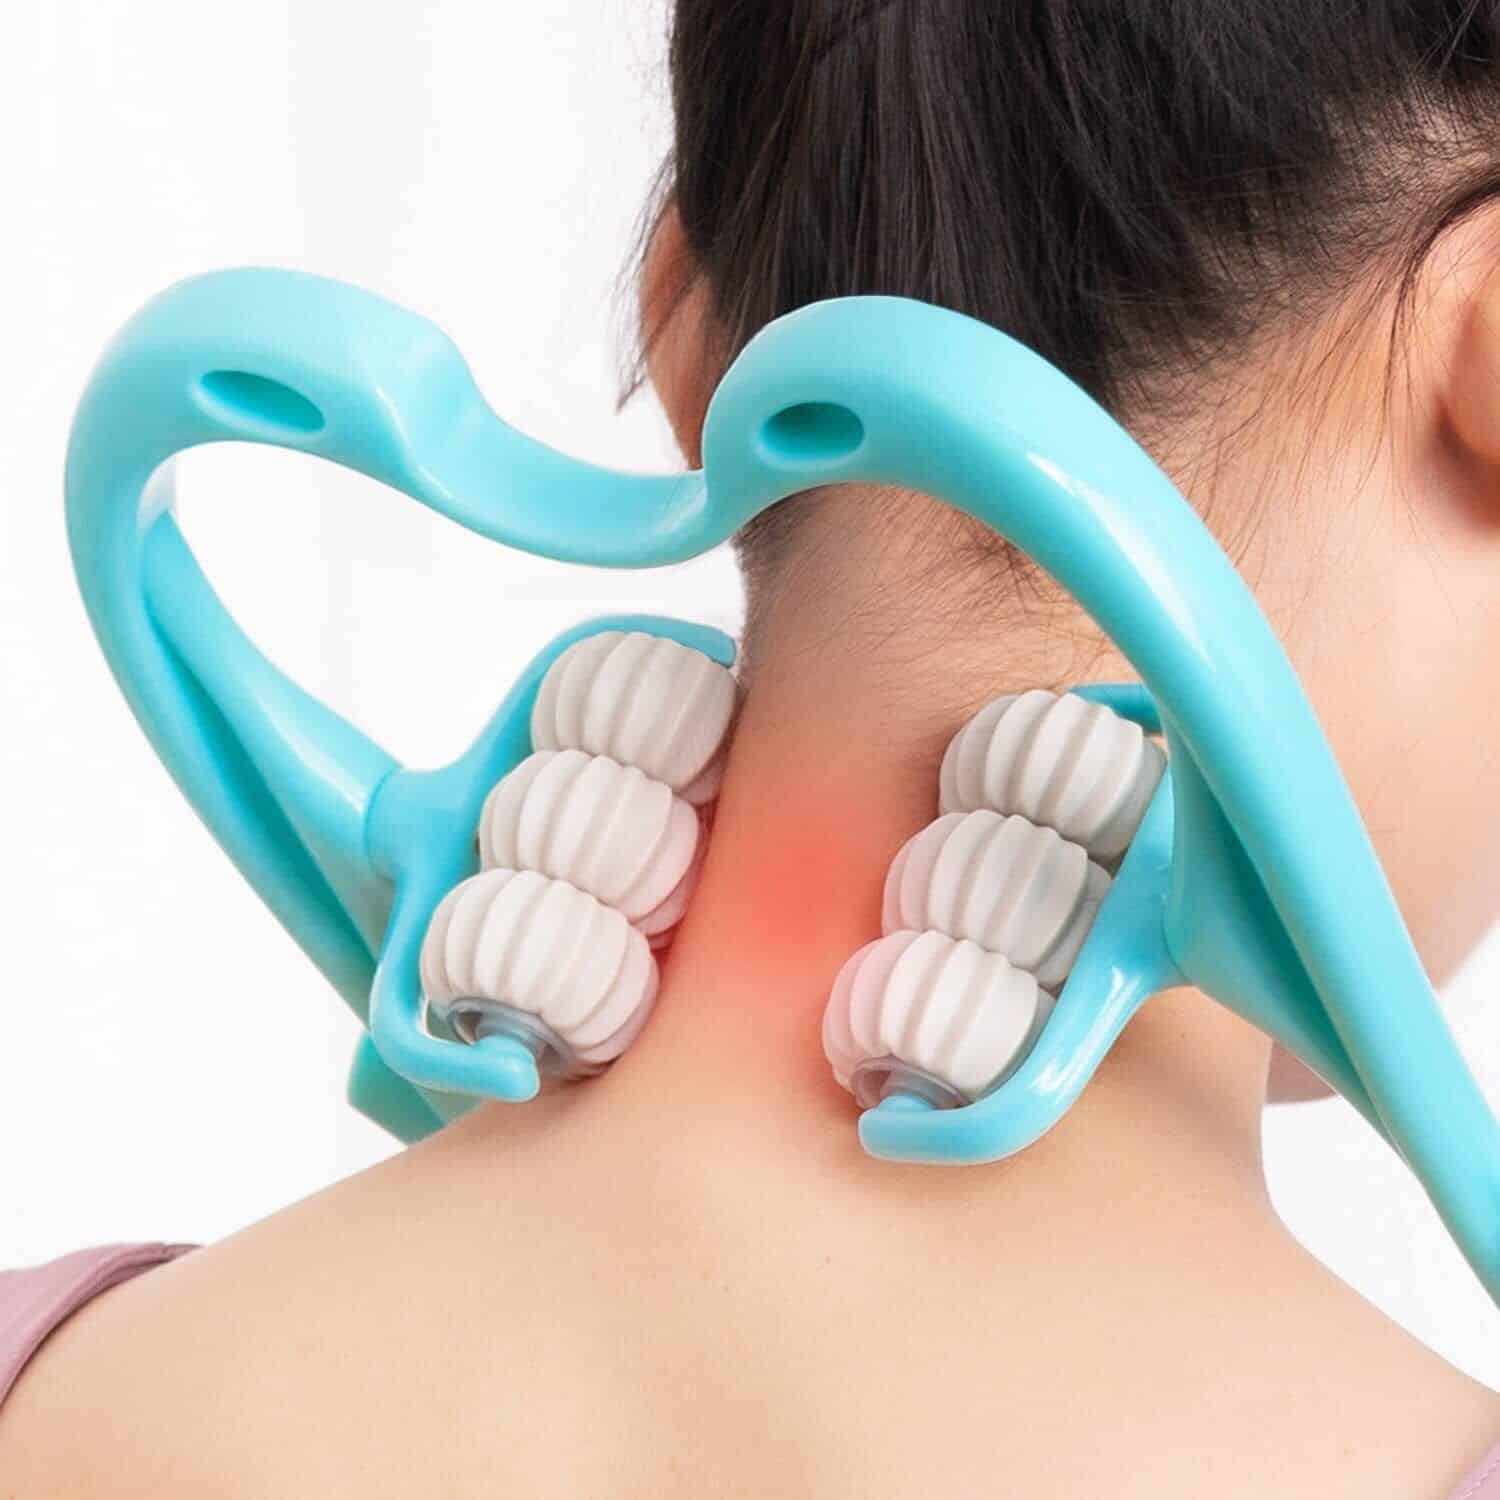 A picture of a woman using a neck massager